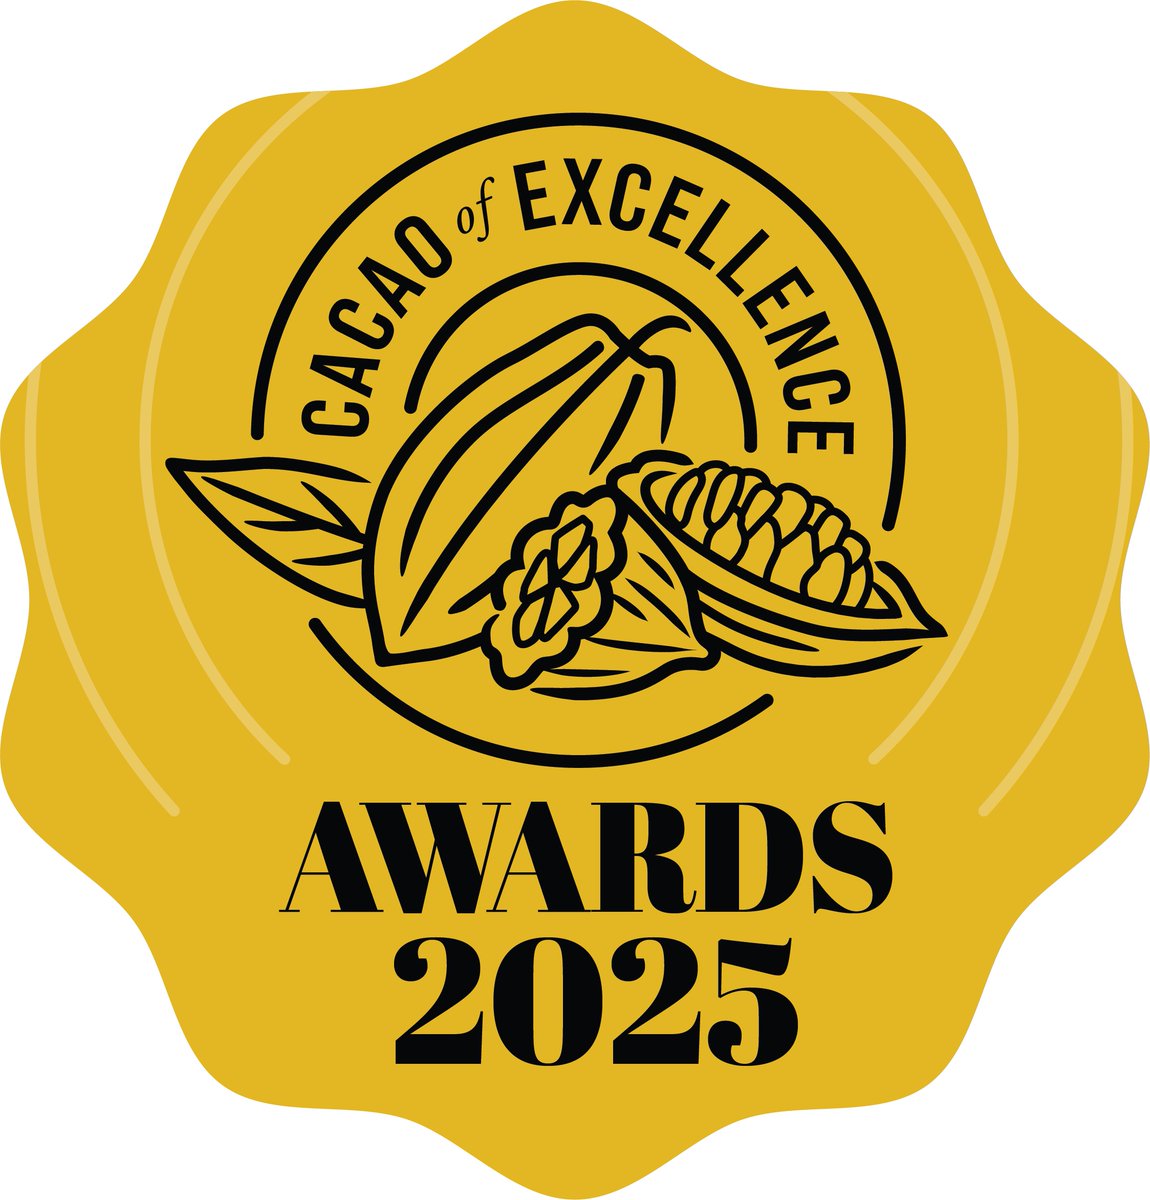 📣 Calling all cacao producers! Interested in the 2025 Cacao of Excellence Awards? 👉🏾 Each participating origin establishes a National Organisation Committee (NOC) to oversee participation. Stay tuned for the NOC list and participation guide on our website in early June 2024!